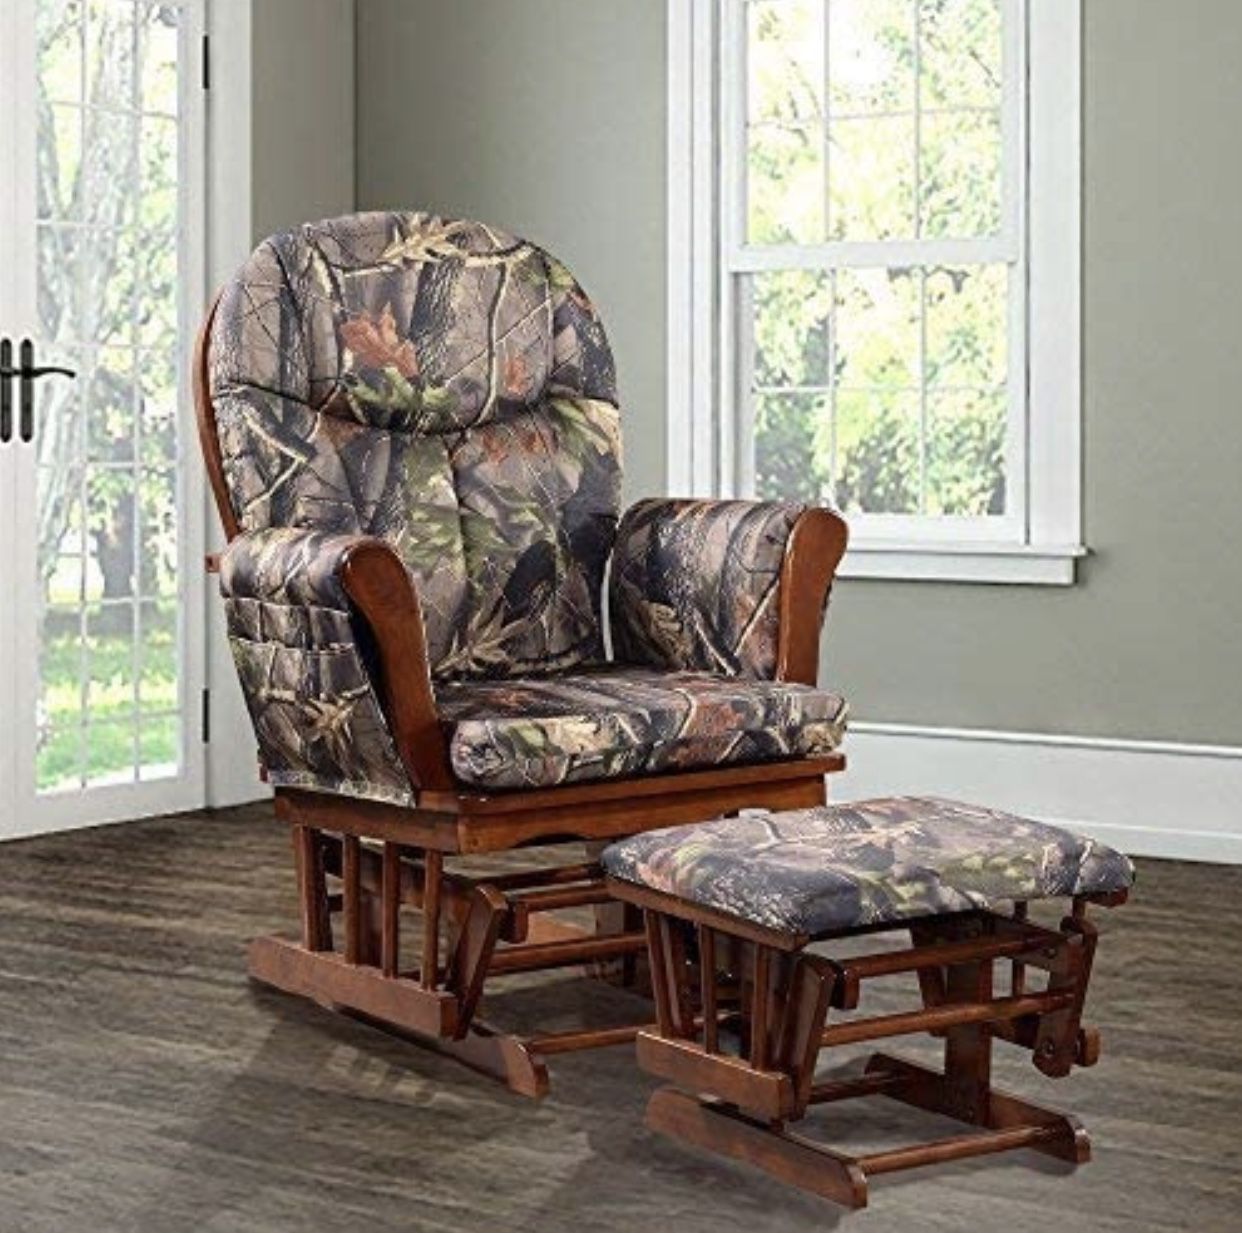 🦌🌿N-E-W-Artiva USA Home Deluxe Camouflage Fabric Cushion Cherry Wood Glider Chair & Ottoman Set